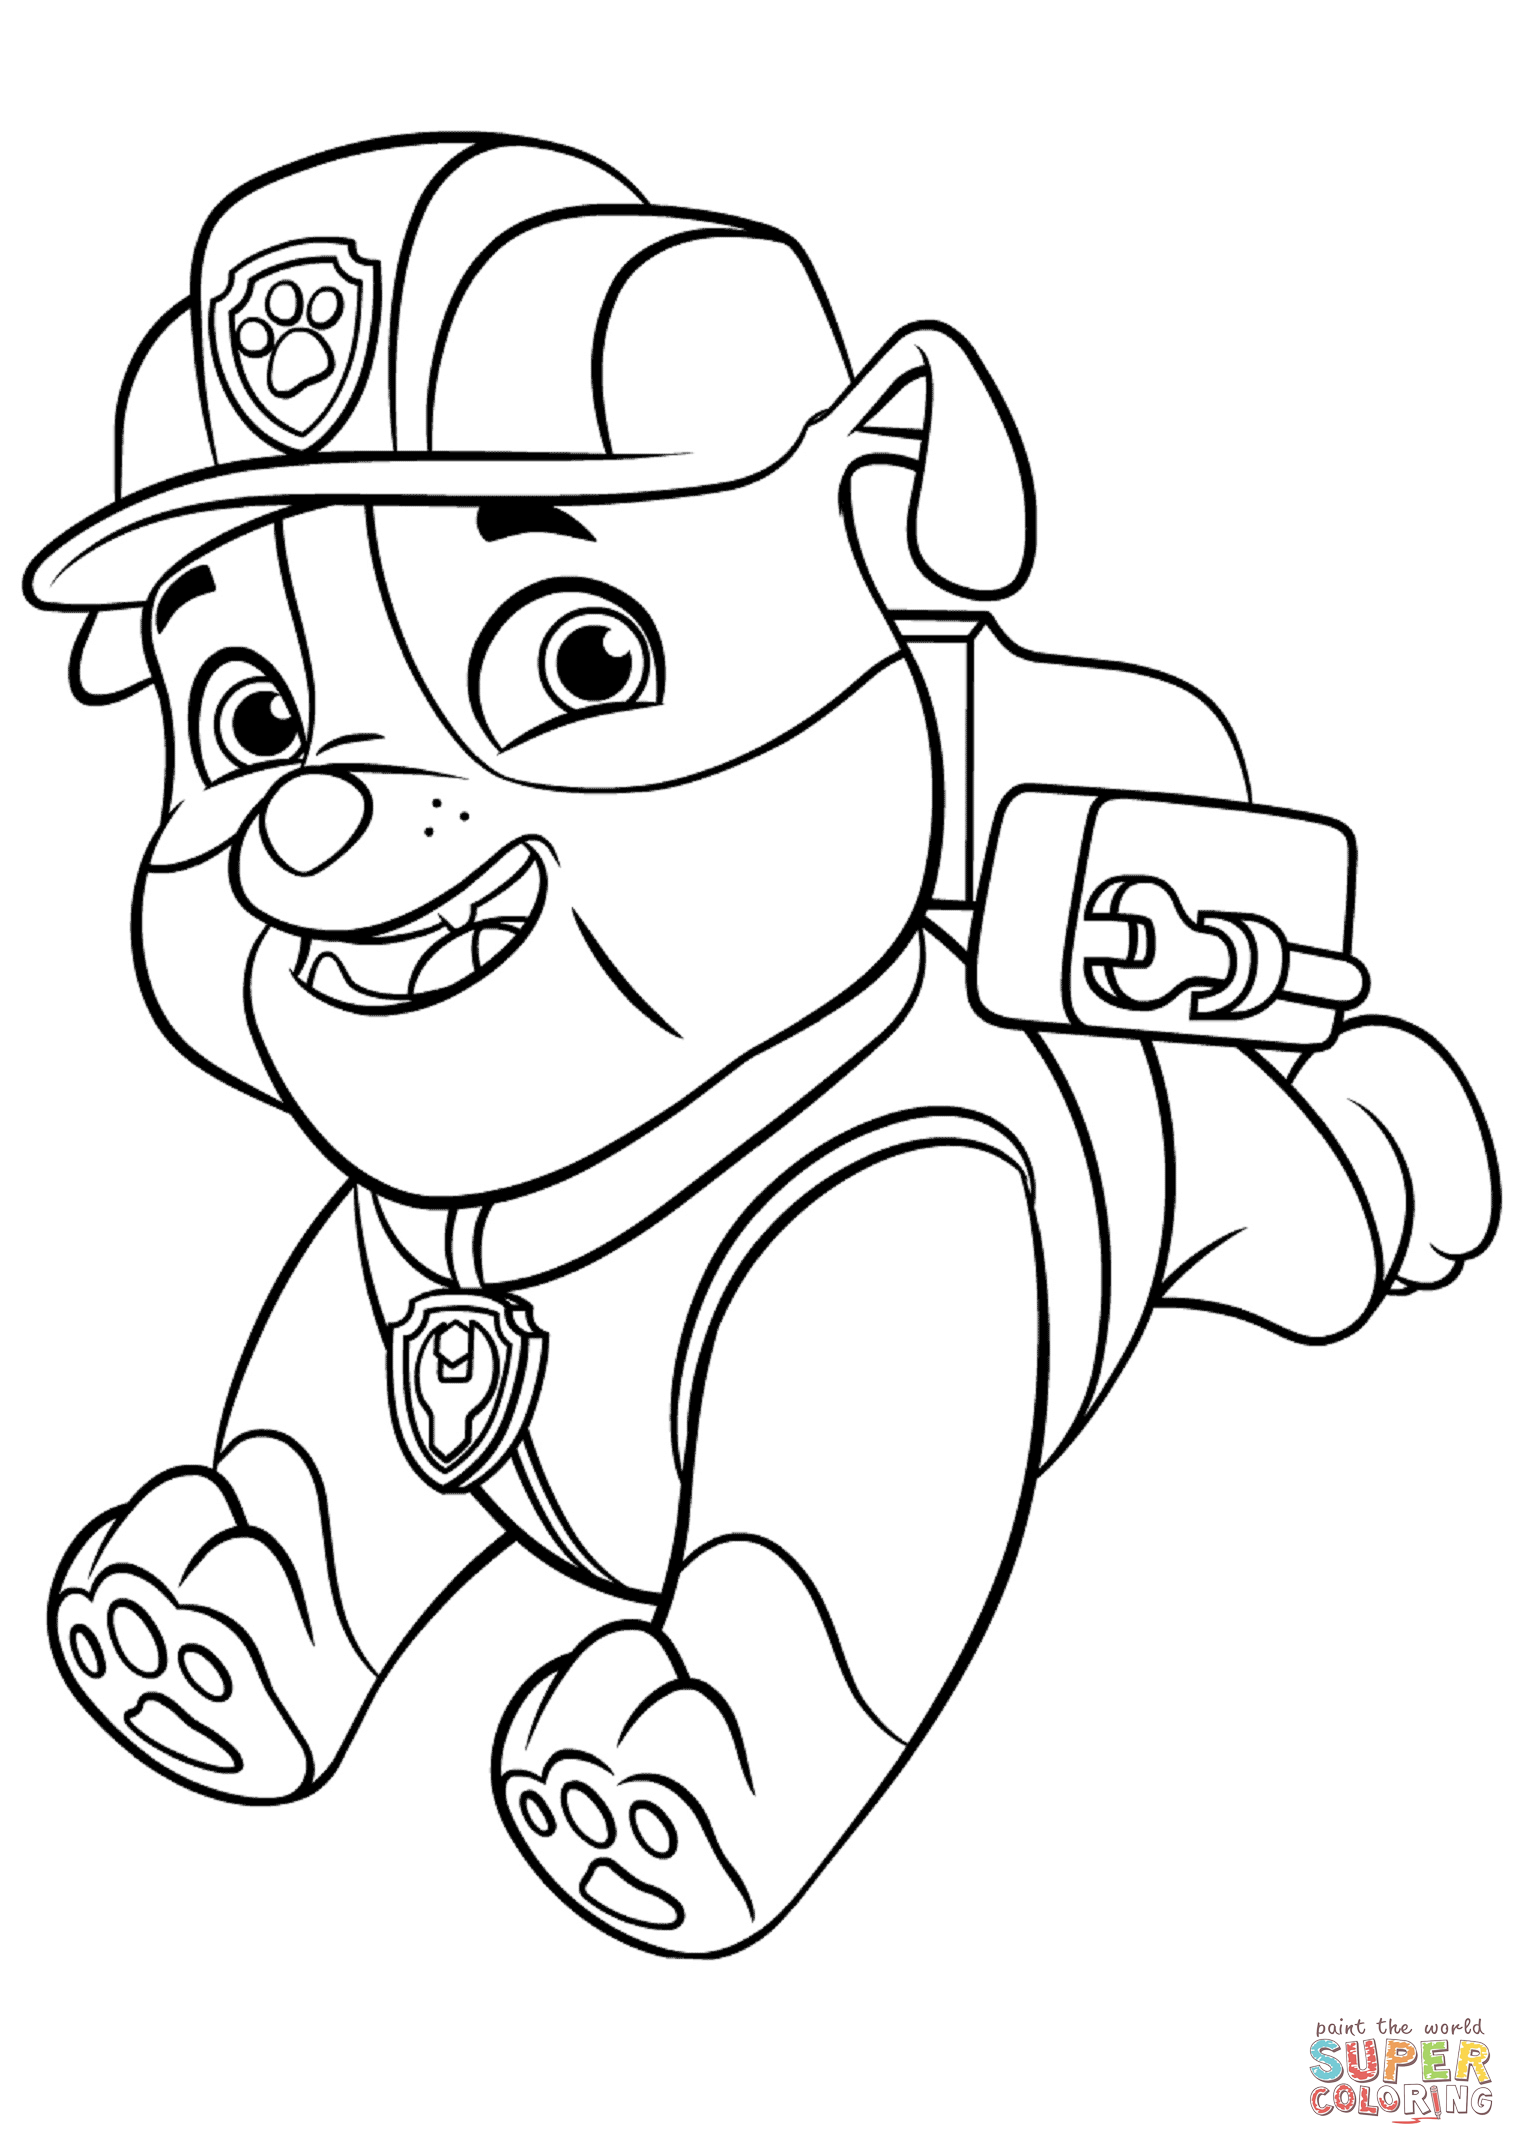 Paw Patrol Rubble with Backpack coloring page | Free Printable ...